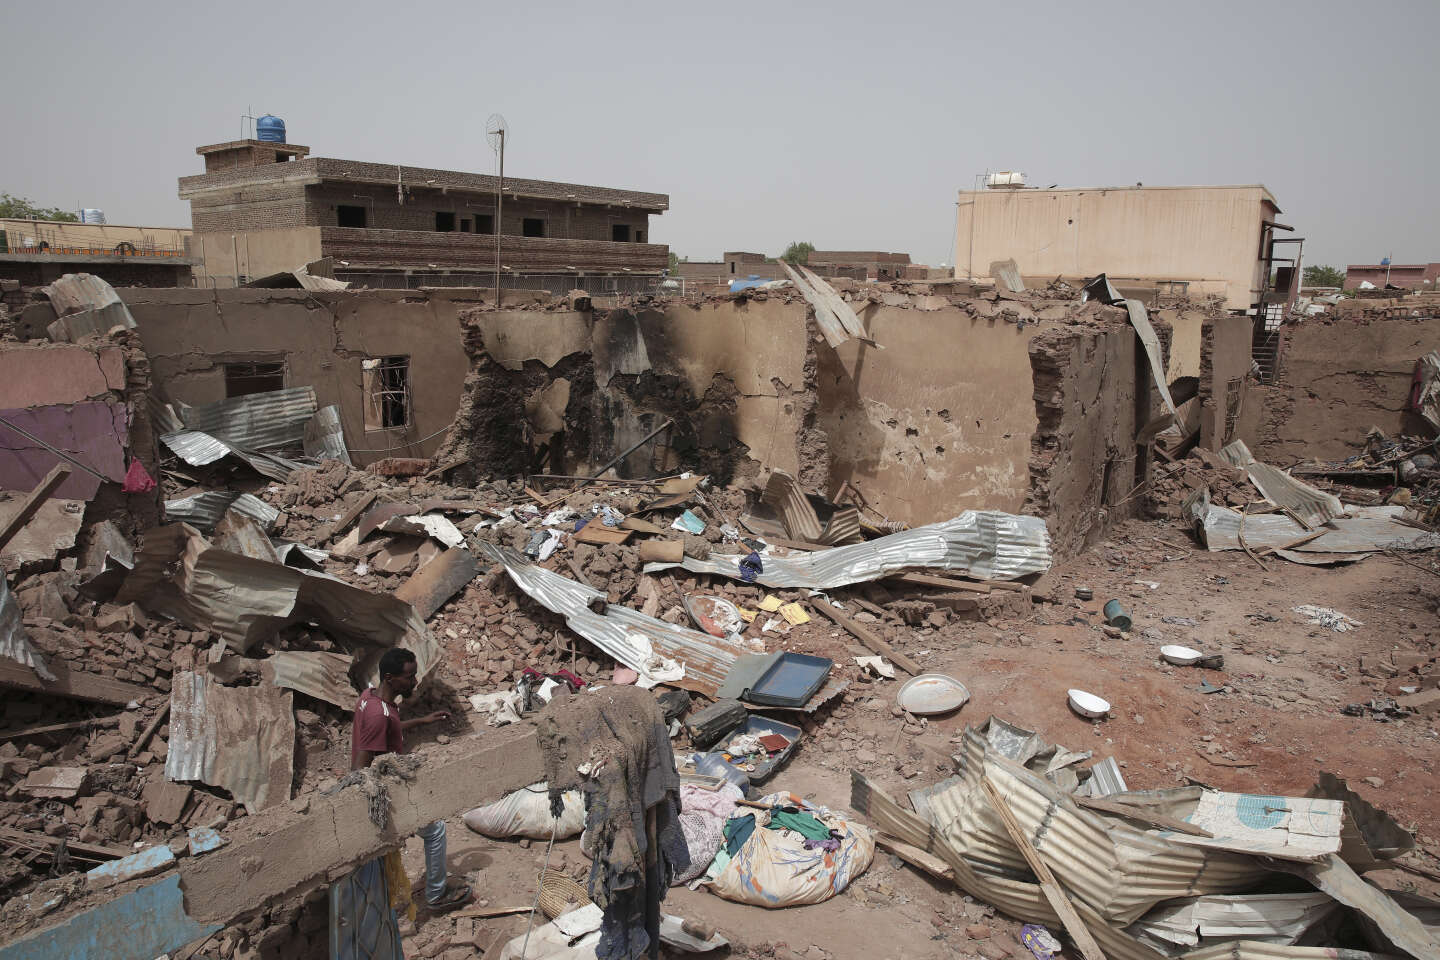 Fierce fighting in Sudan despite ceasefire, humanitarian situation at “catastrophic level”